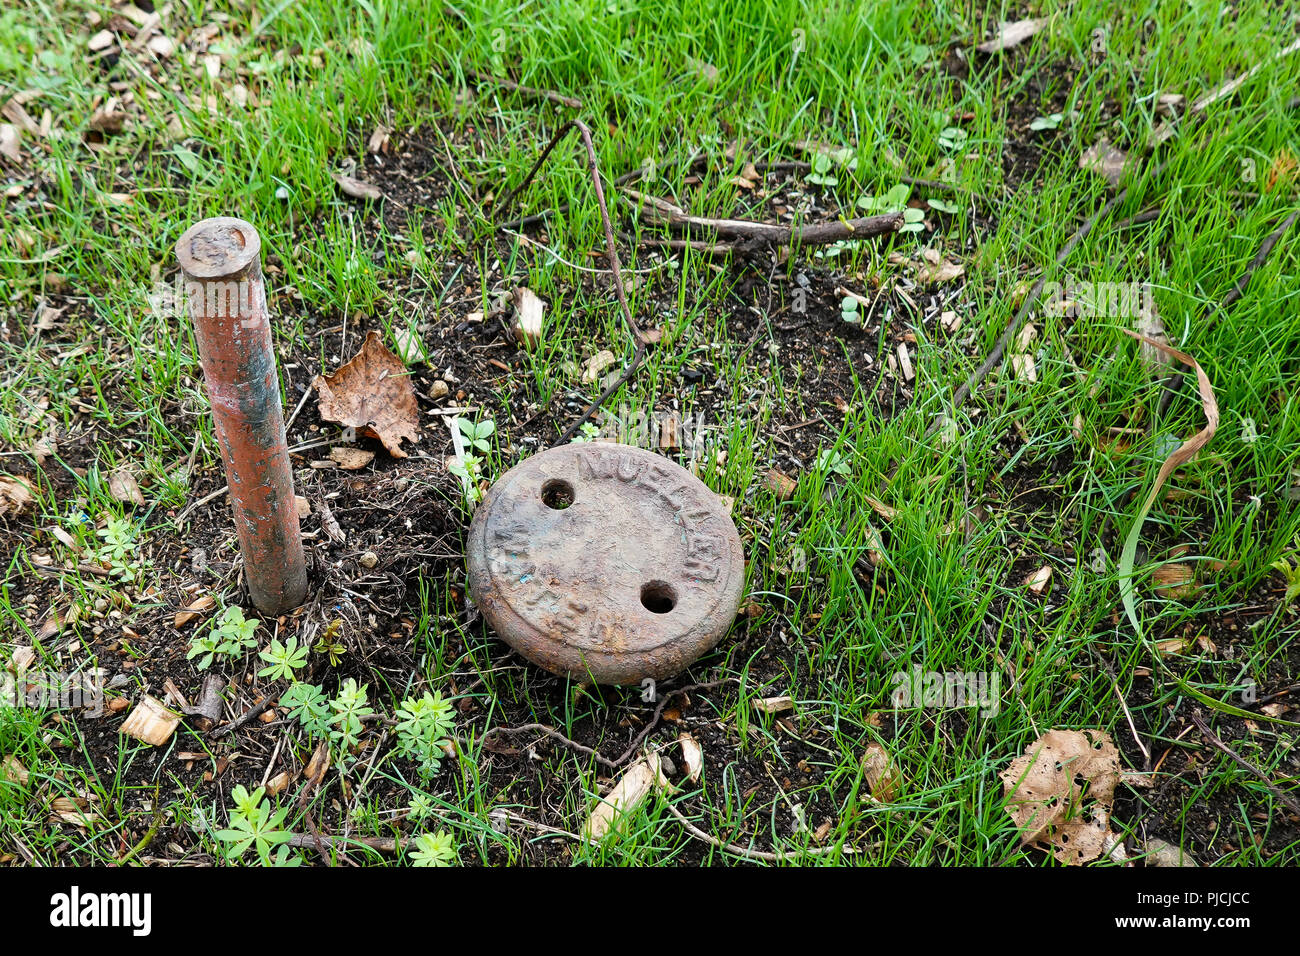 https://c8.alamy.com/comp/PJCJCC/a-rusty-water-shutoff-valve-and-a-survey-stake-marking-a-property-line-with-freshly-planted-grass-PJCJCC.jpg